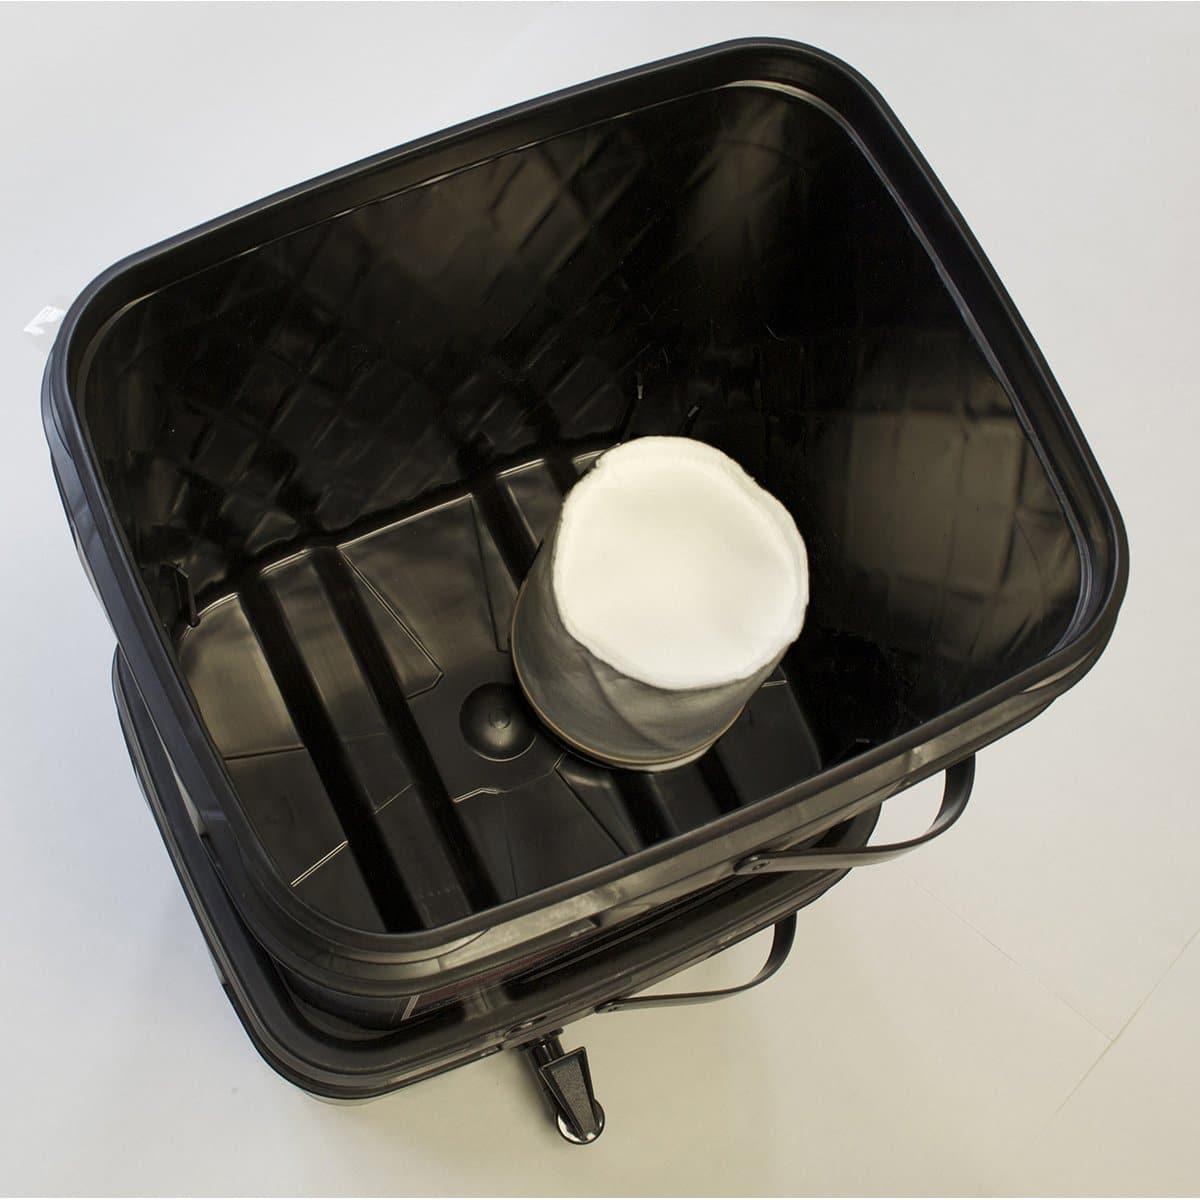 Water Filter Kit for use with ReadyWise Food Buckets - ReadyWise